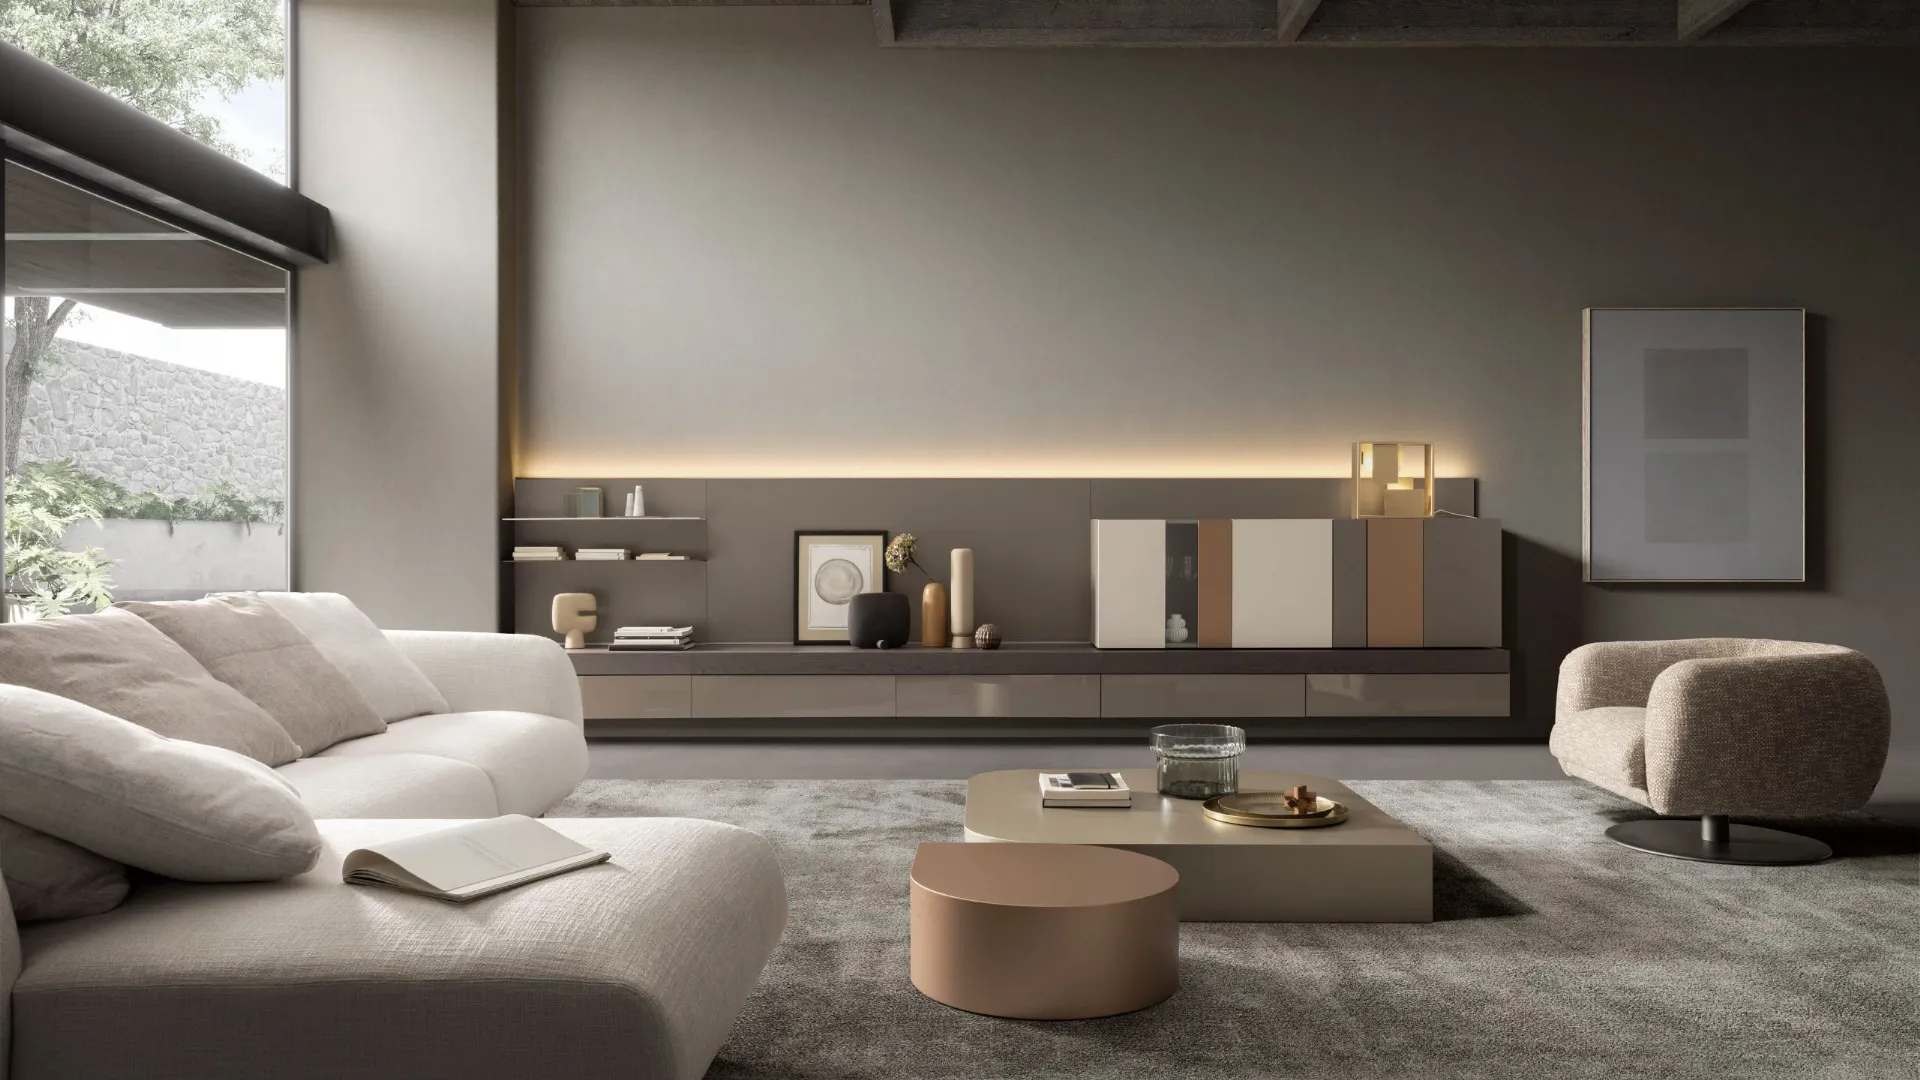 The equipped walls, tailor-made configurations for the living room